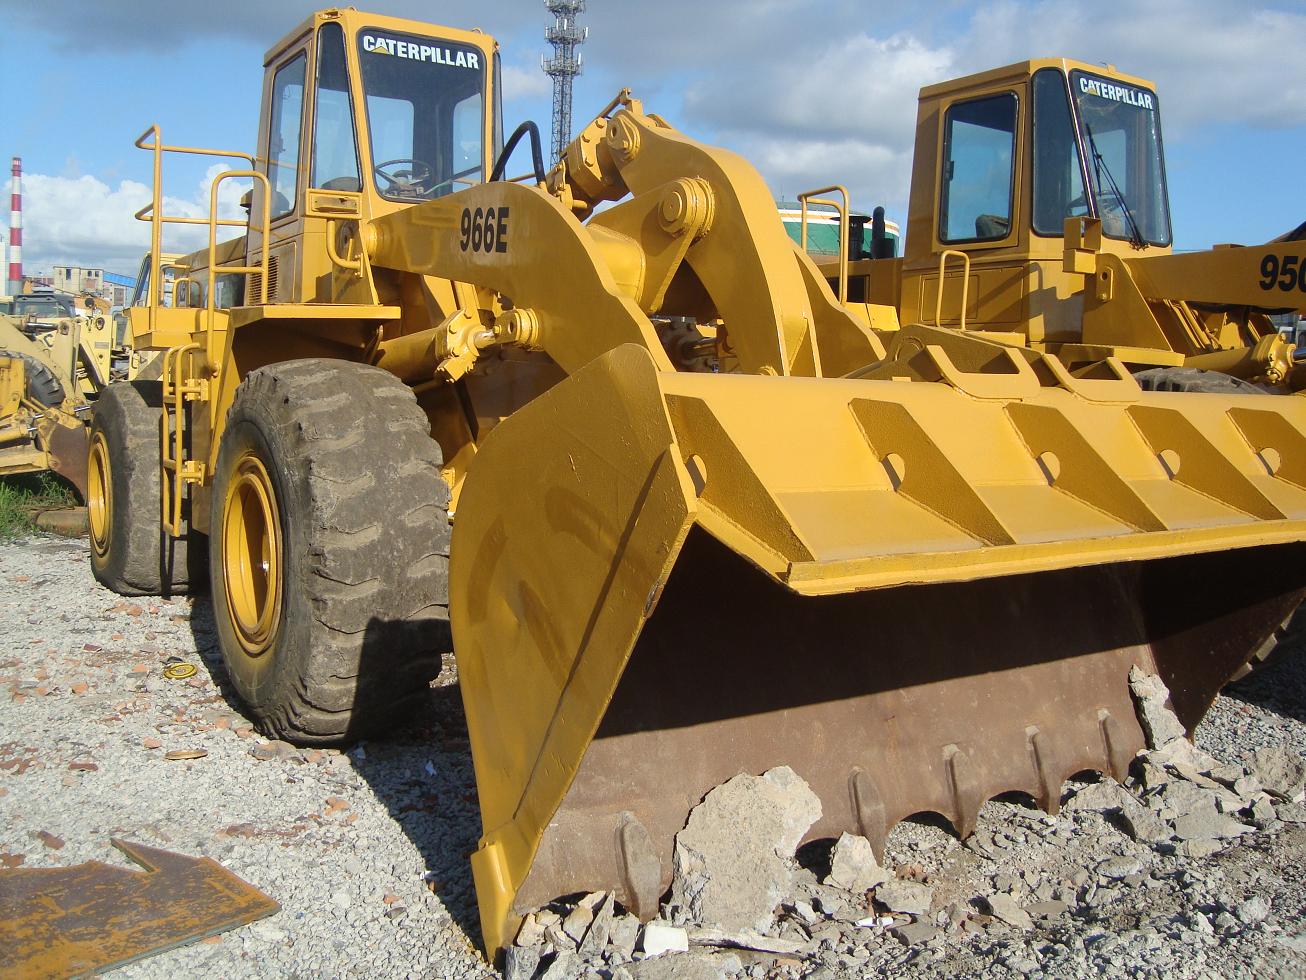 used cat loader 966E caterpillar 966E only 22000 USD